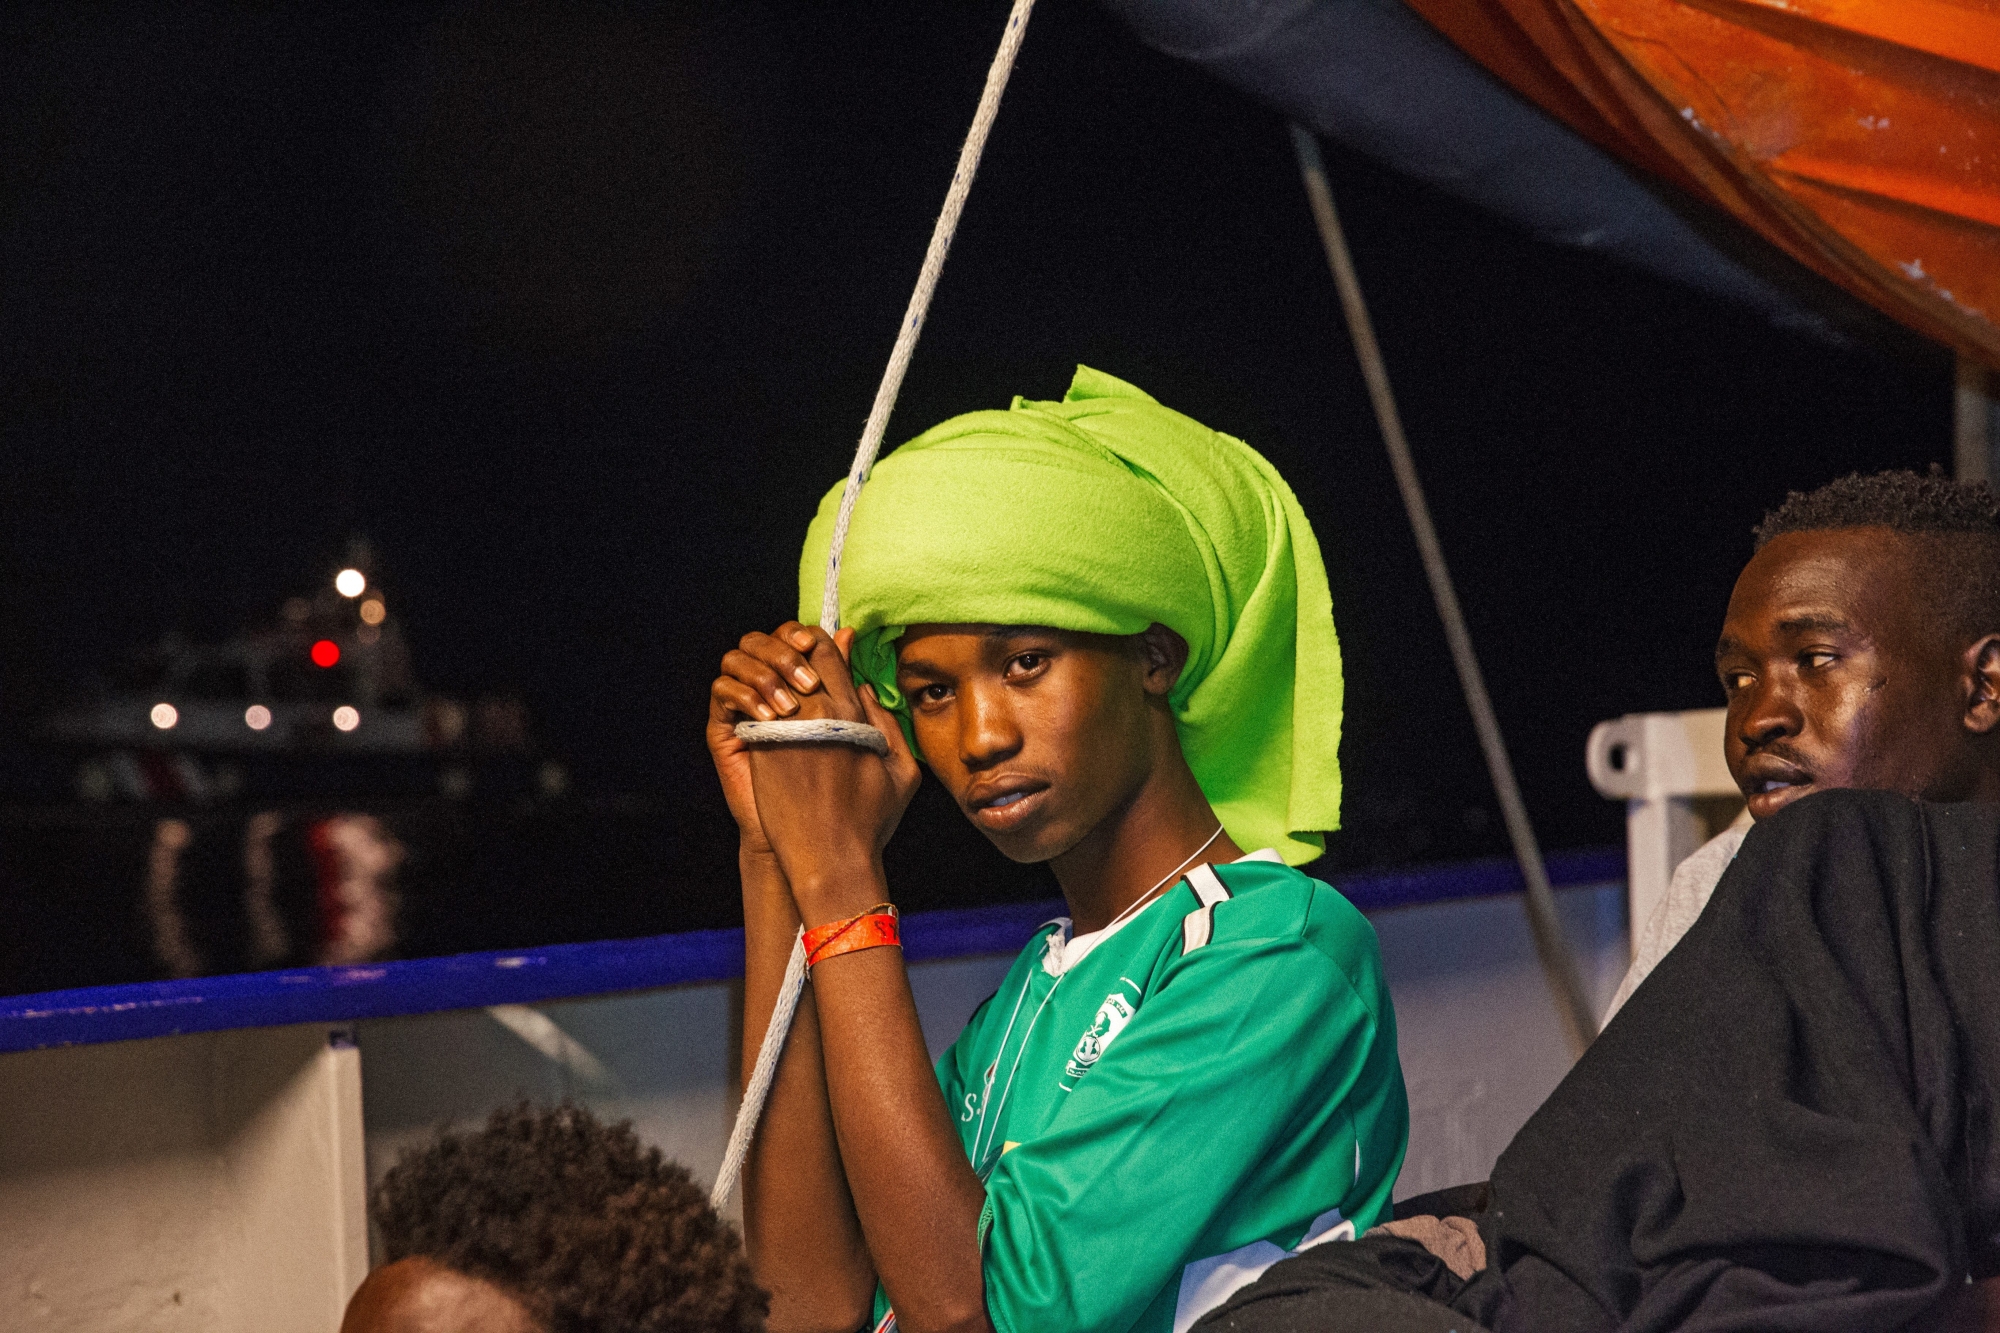 epa06838211 A handout photo made available by German NGO 'Mission Lifeline' on 25 June 2018 shows migrants aboard the NGO's rescue vessel 'Lifeline' in the Mediterranean, 25 June 2018. Members of the German parliament Bundestag on 25 June reported from their visit to the ship saying they witnessed a 'catastrophic' situation. Both Italy and Malta deny the ship an entry to one of their country's ports.  EPA/Felix Weiss / HANDOUT  HANDOUT EDITORIAL USE ONLY/NO SALES AT SEA MIGRATION LIFELINE